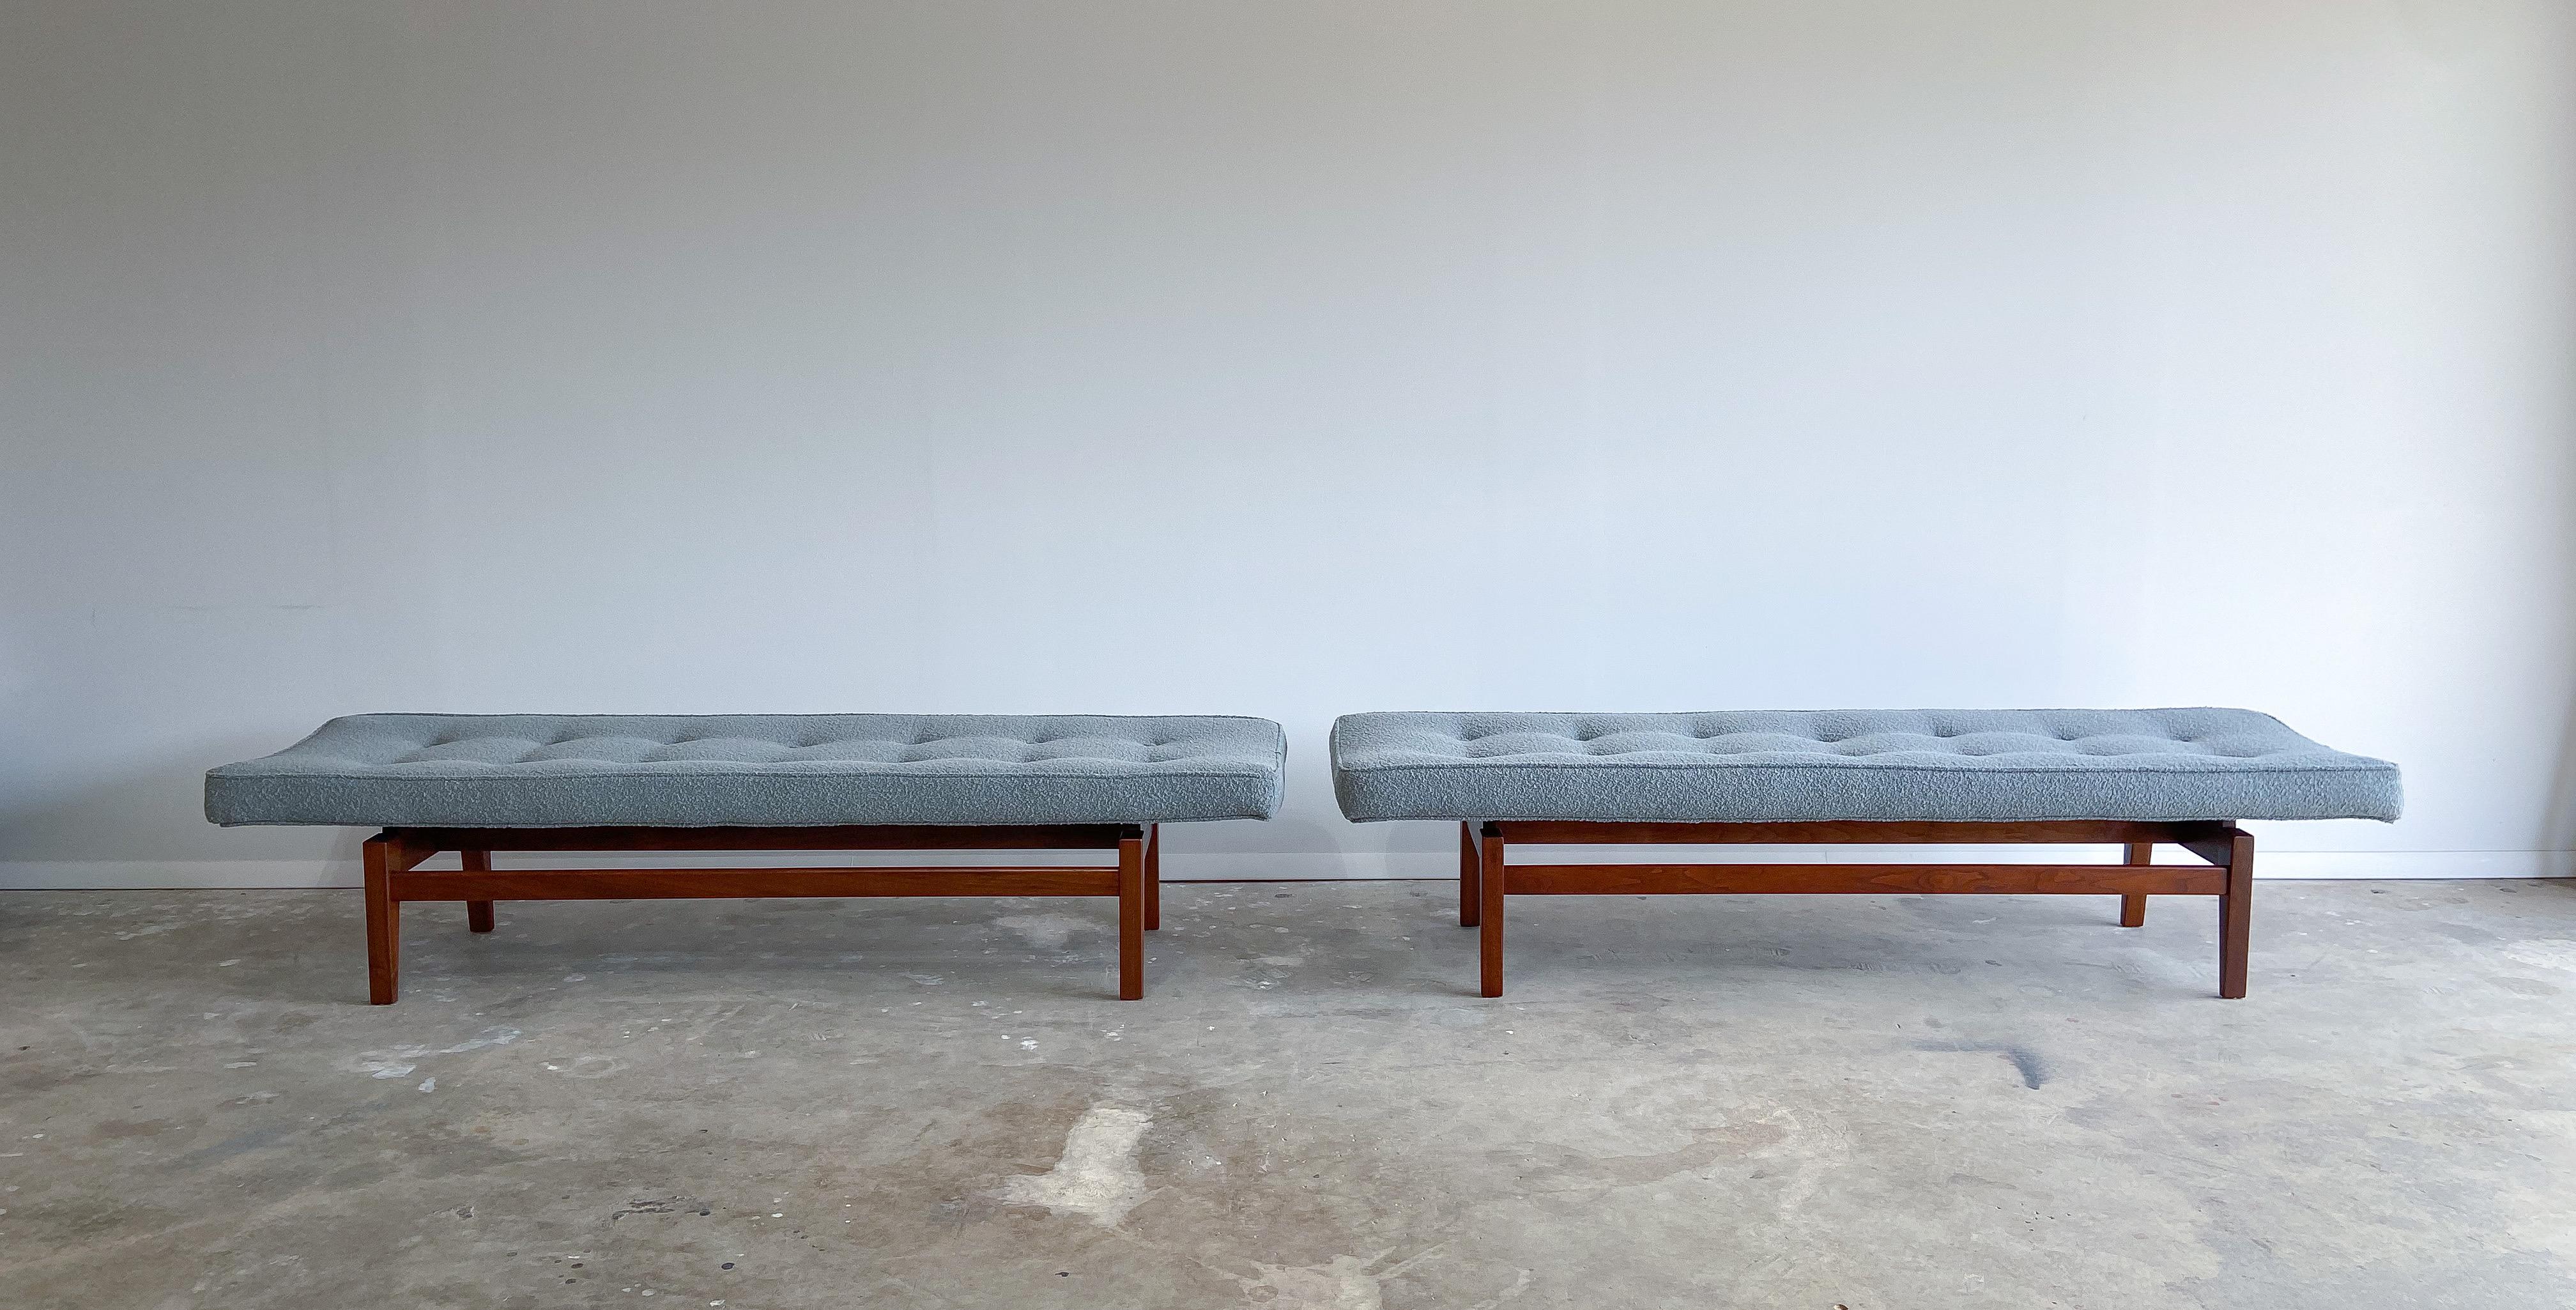 *Please note one bench has sold. 

A wonderful Jens Risom model T621 upholstered bench. This is the less-common 72